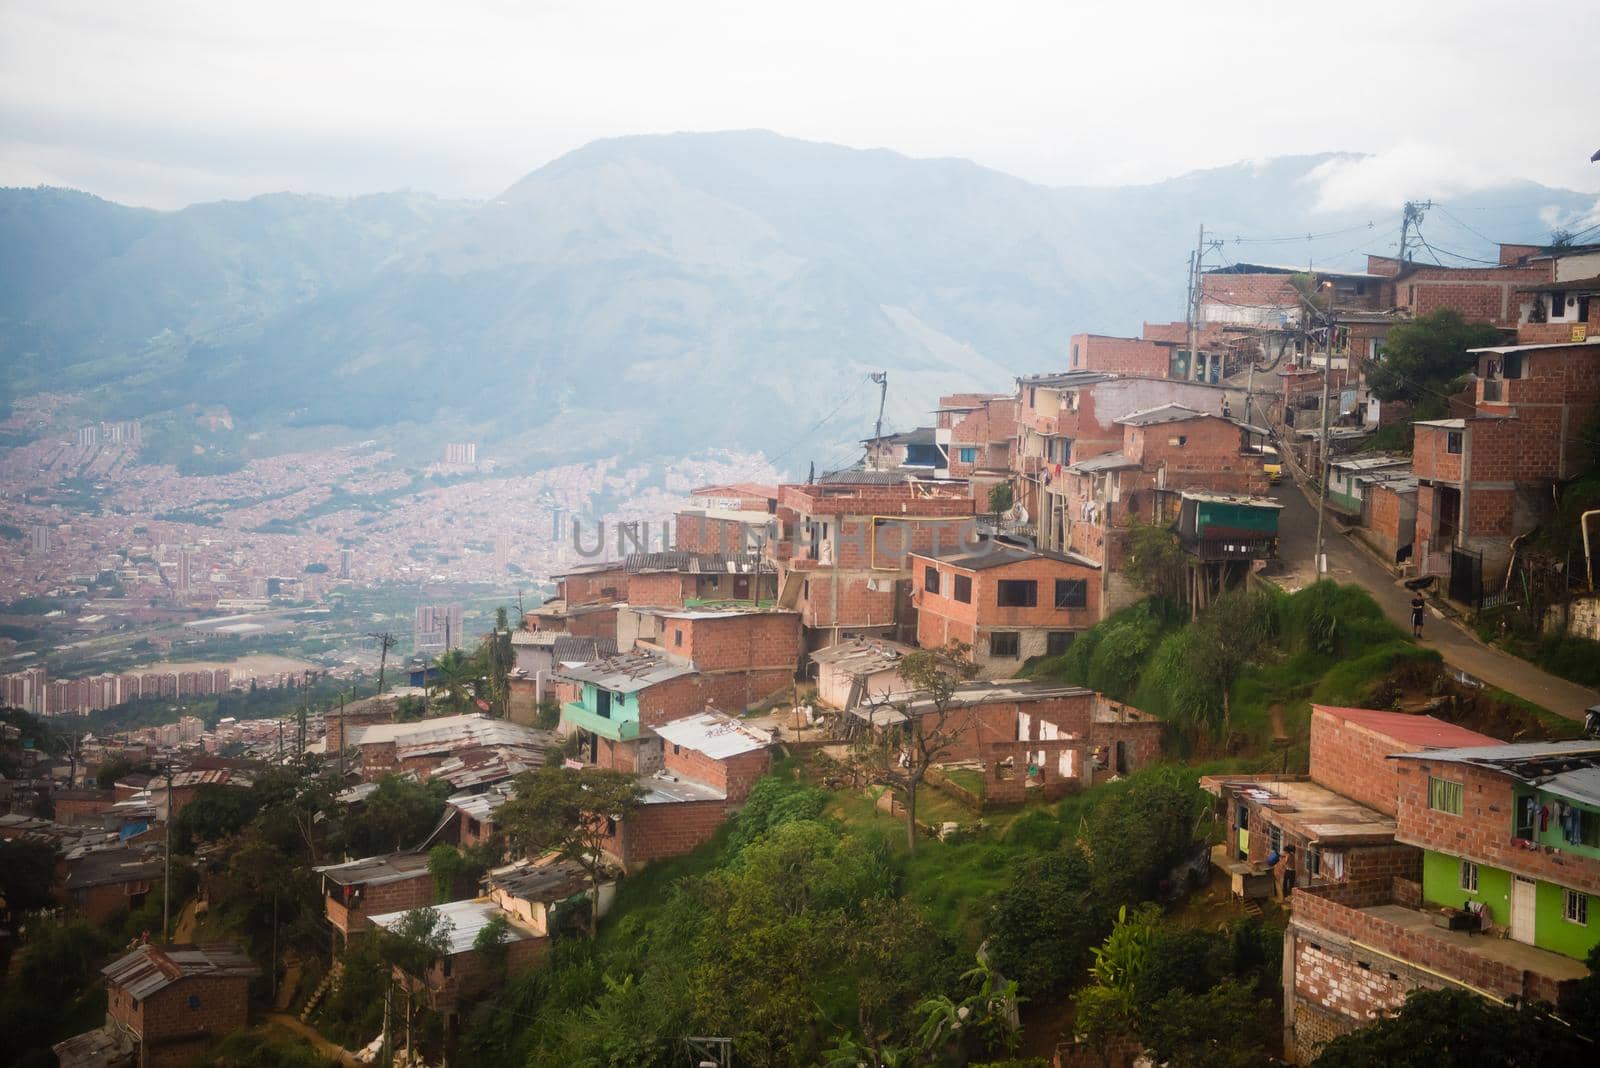 Houses on hillside with mountains in the background in Medellin, Colombia. by jyurinko